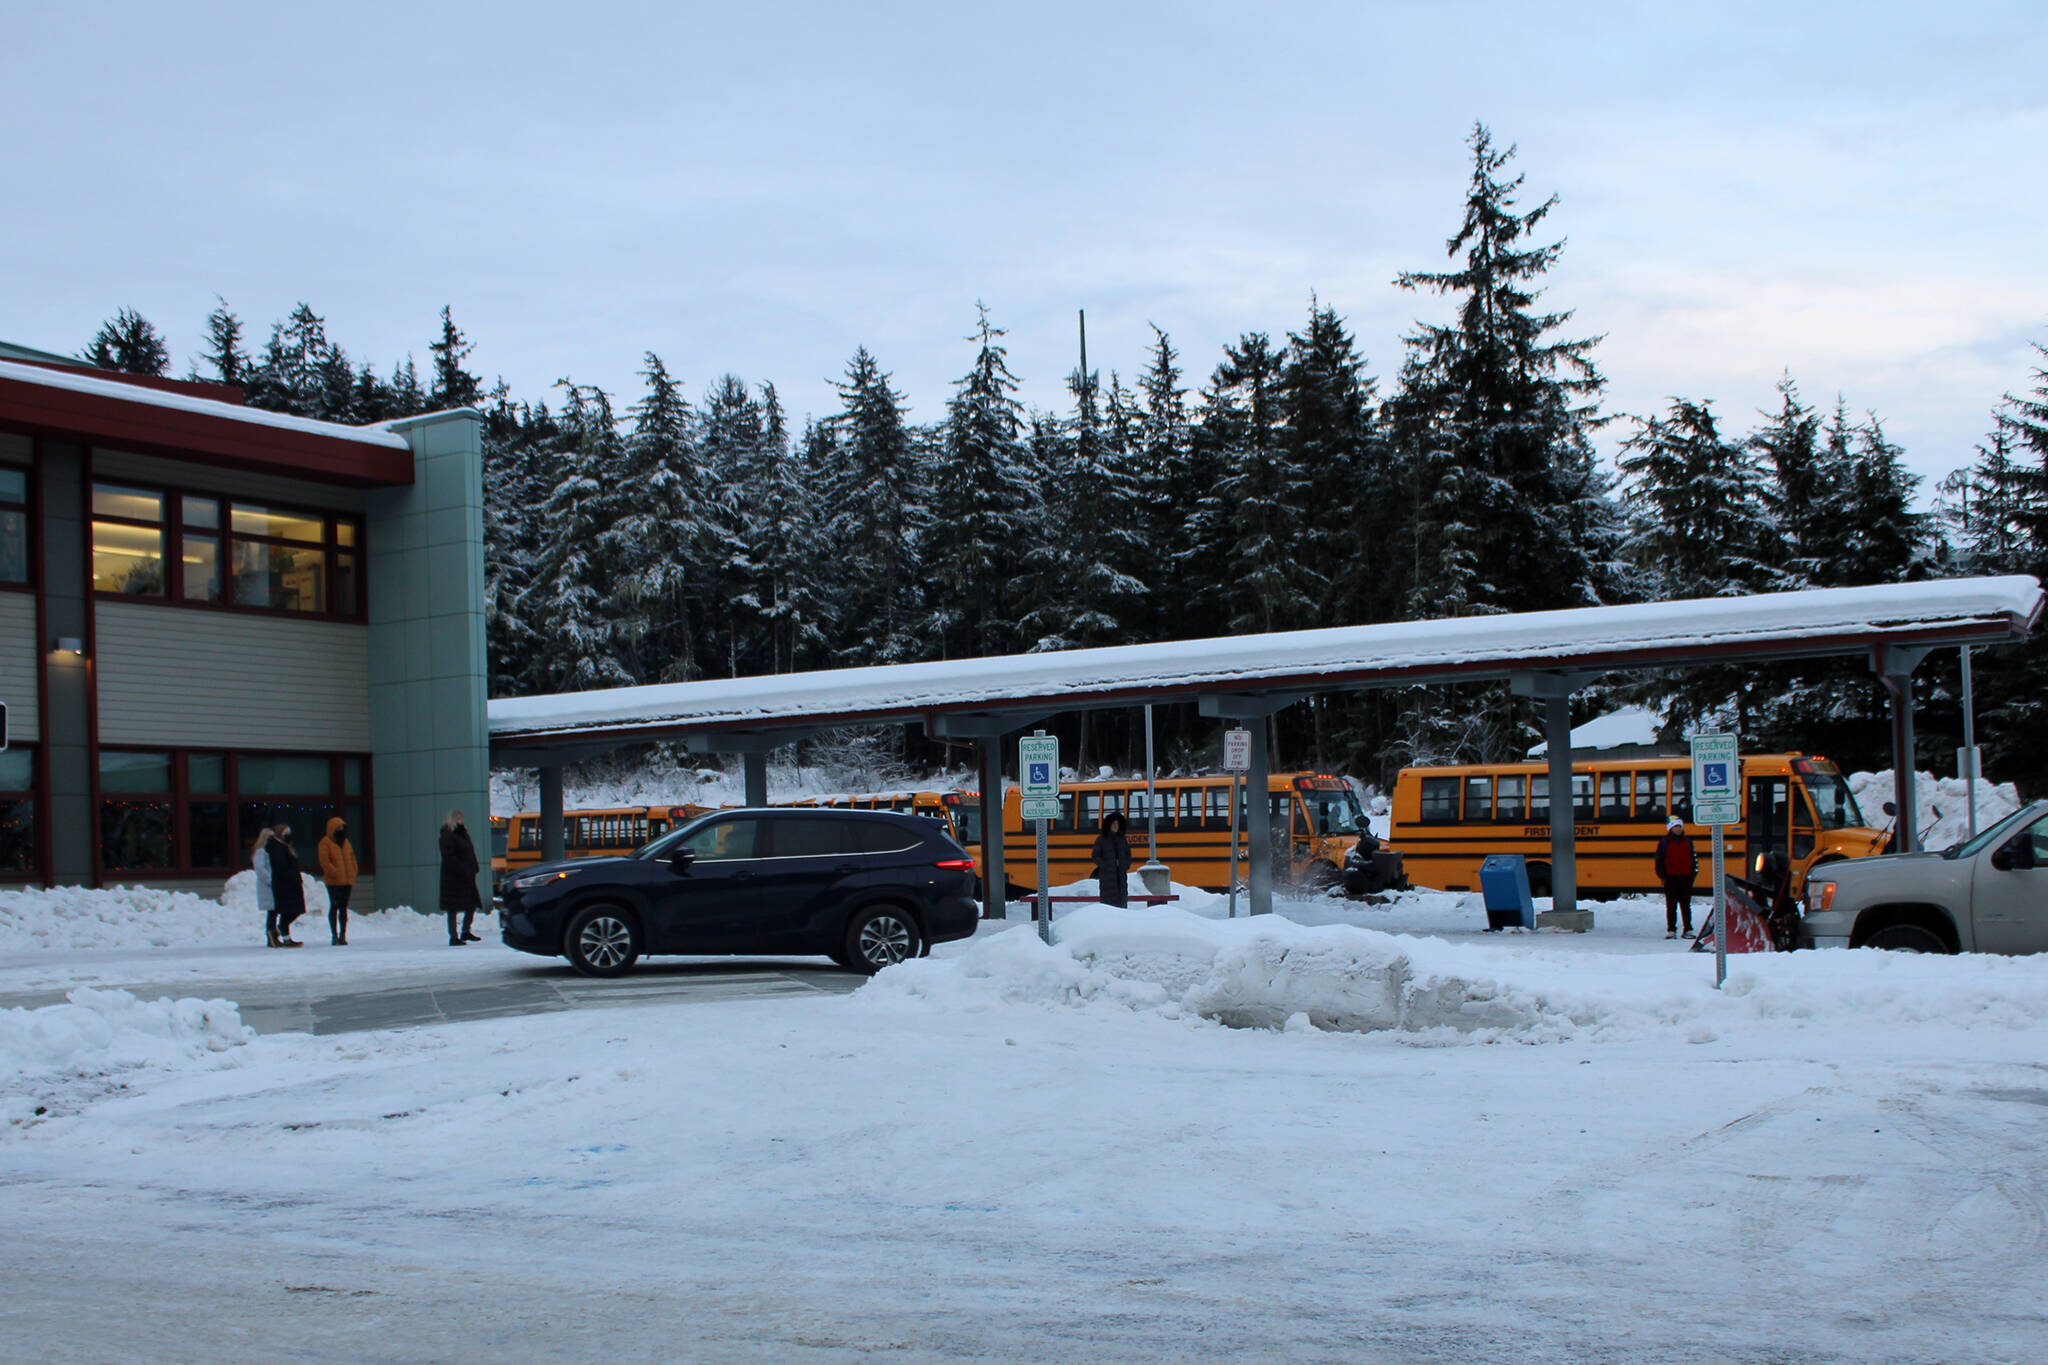 Buses leave Auke Bay Elementary School at the end of the school day on Dec. 16. Auke Bay is one of the school buildings that was renovated using the state's school bond debt reimbursement program that allows municipalities to renovate eligible schools by reimbursing about 70% of the cost of the project  if it is approved by a referendum. This type of debt funding was also used to renovate Sayéik: Gastineau Community School and Harborview elementary schools. In recent years, the state had not provided the full reimbursement amount. However, Gov. Mike Dunleavy proposed full funding for the program in the budget he unveiled Wednesday. (Dana Zigmund/Juneau Empire)